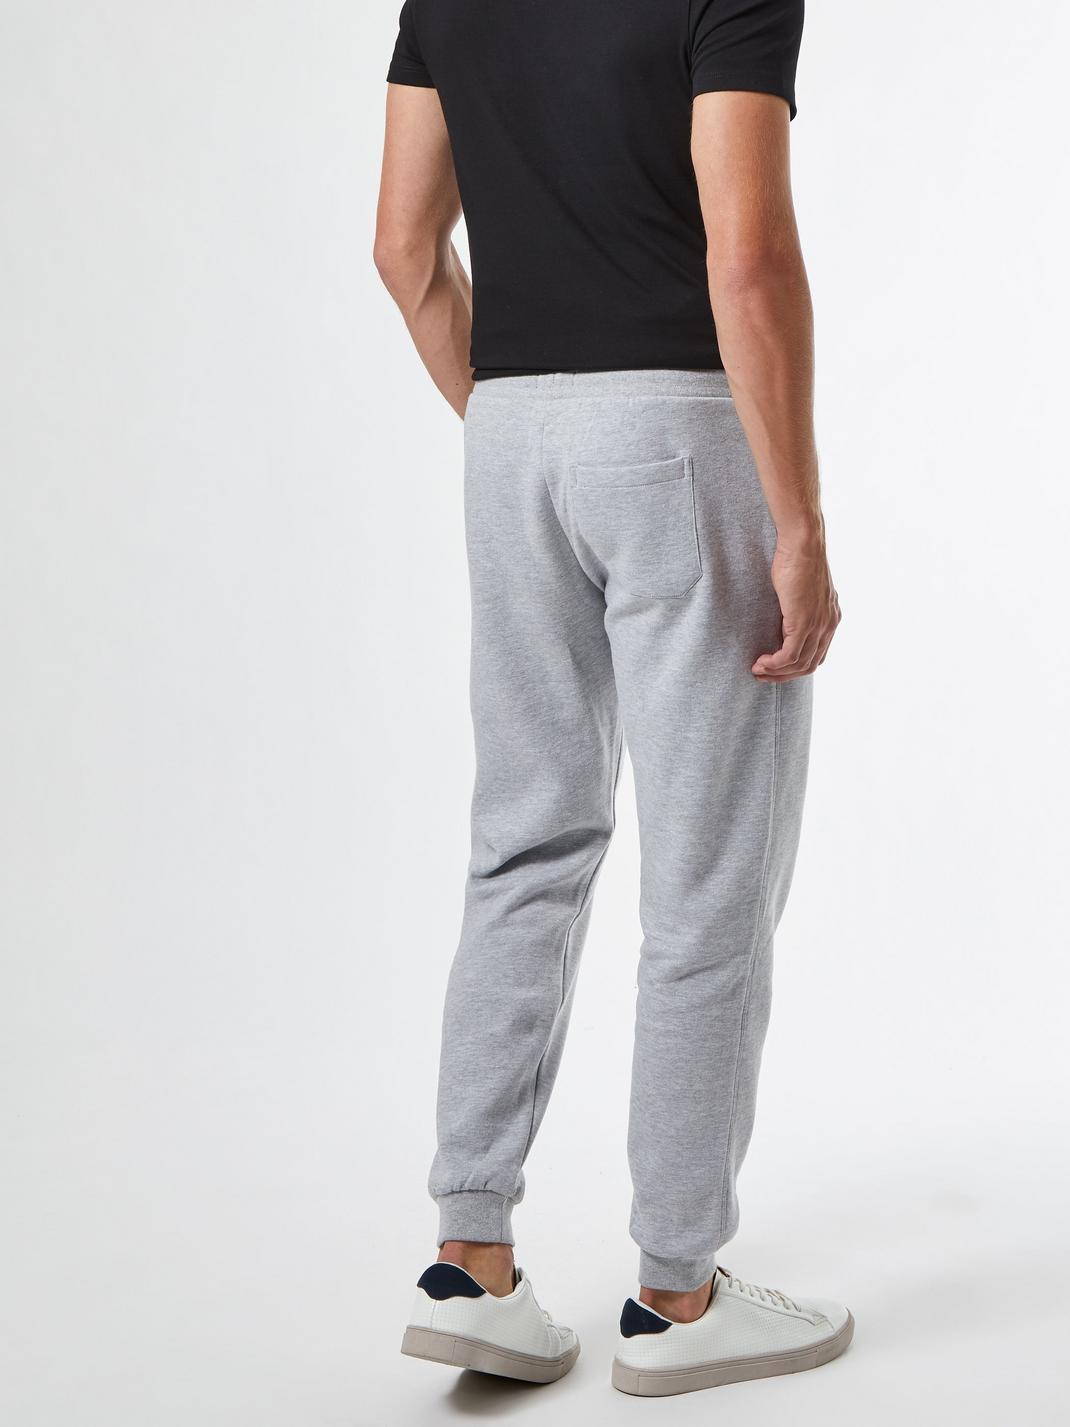 131 Grey Joggers image number 2